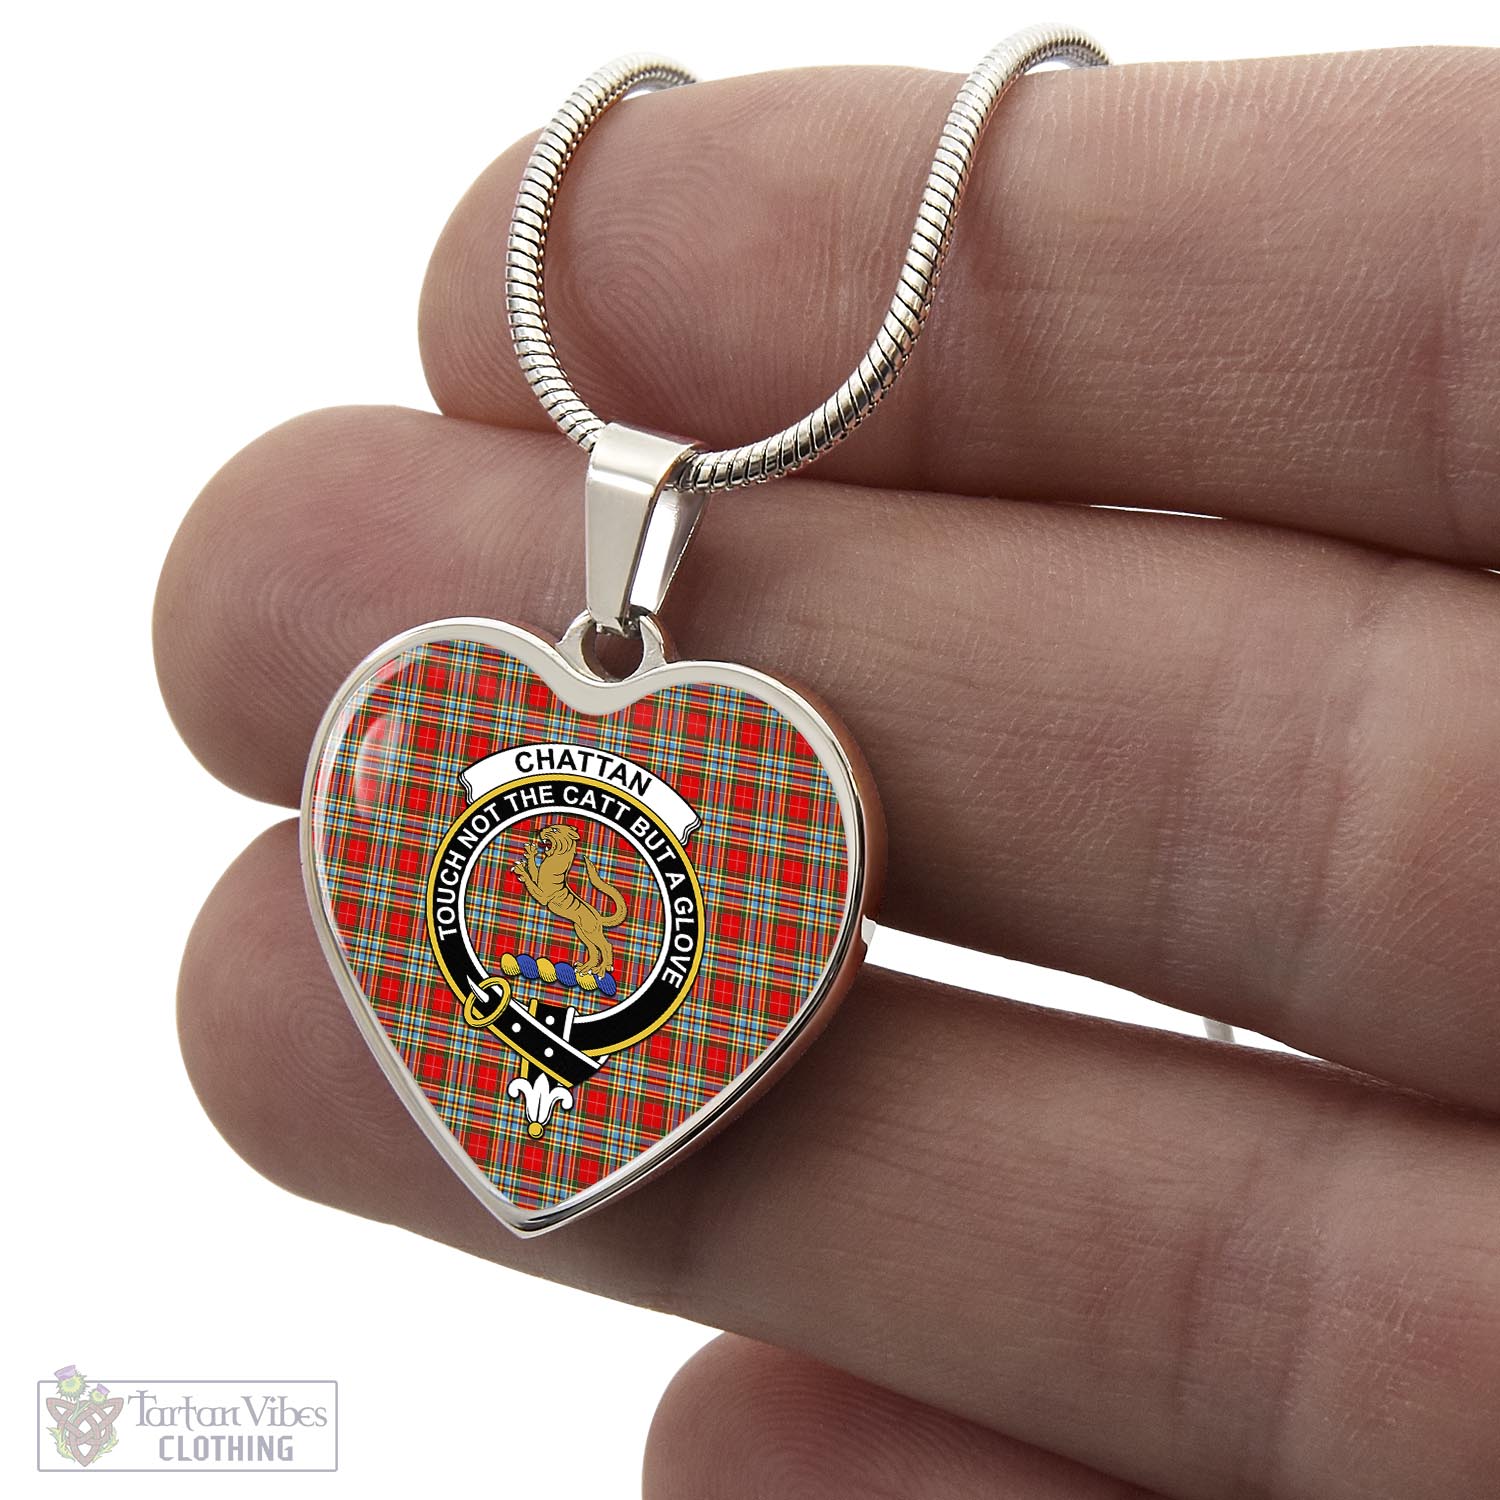 Tartan Vibes Clothing Chattan Tartan Heart Necklace with Family Crest